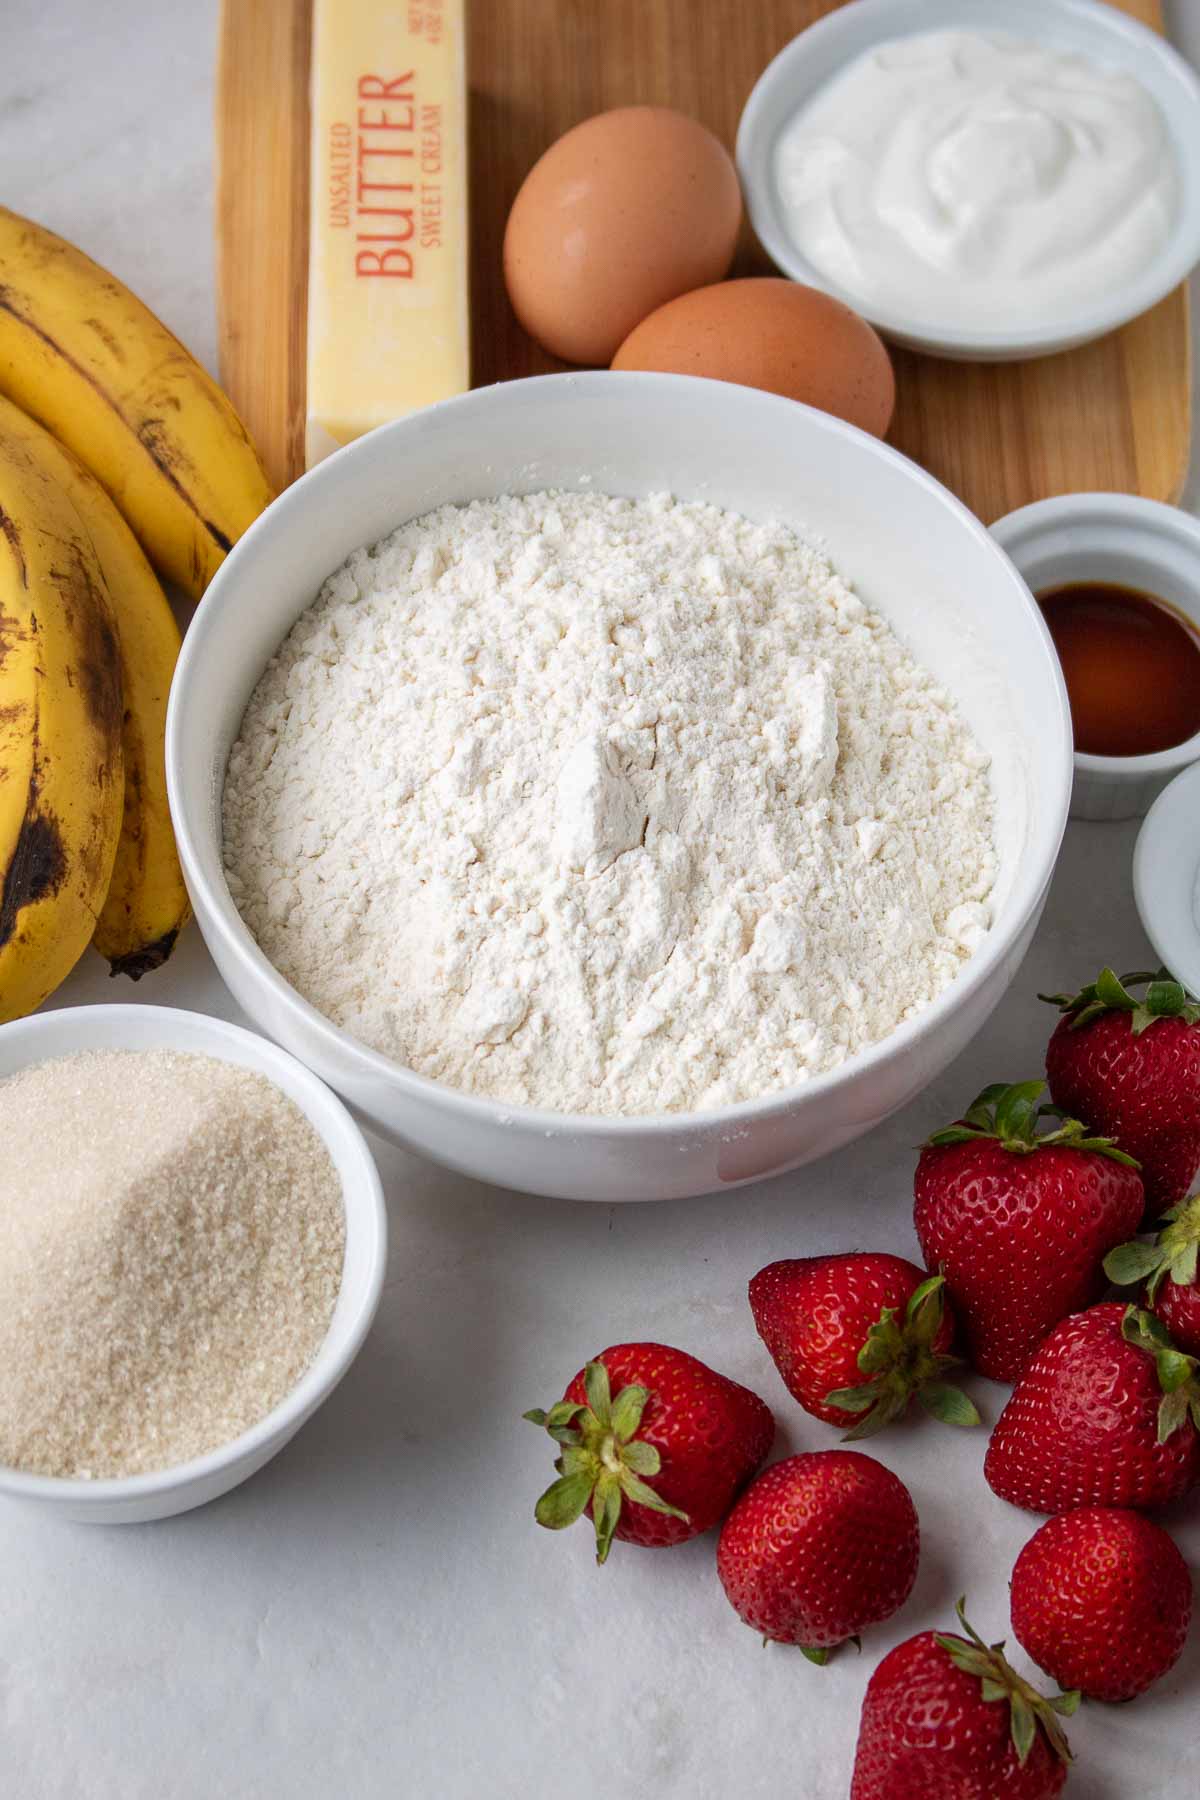 Image of the ingredients for strawberry banana bread, including flour, sugar, baking soda, salt, bananas, eggs, vanilla extract, butter, and fresh strawberries.